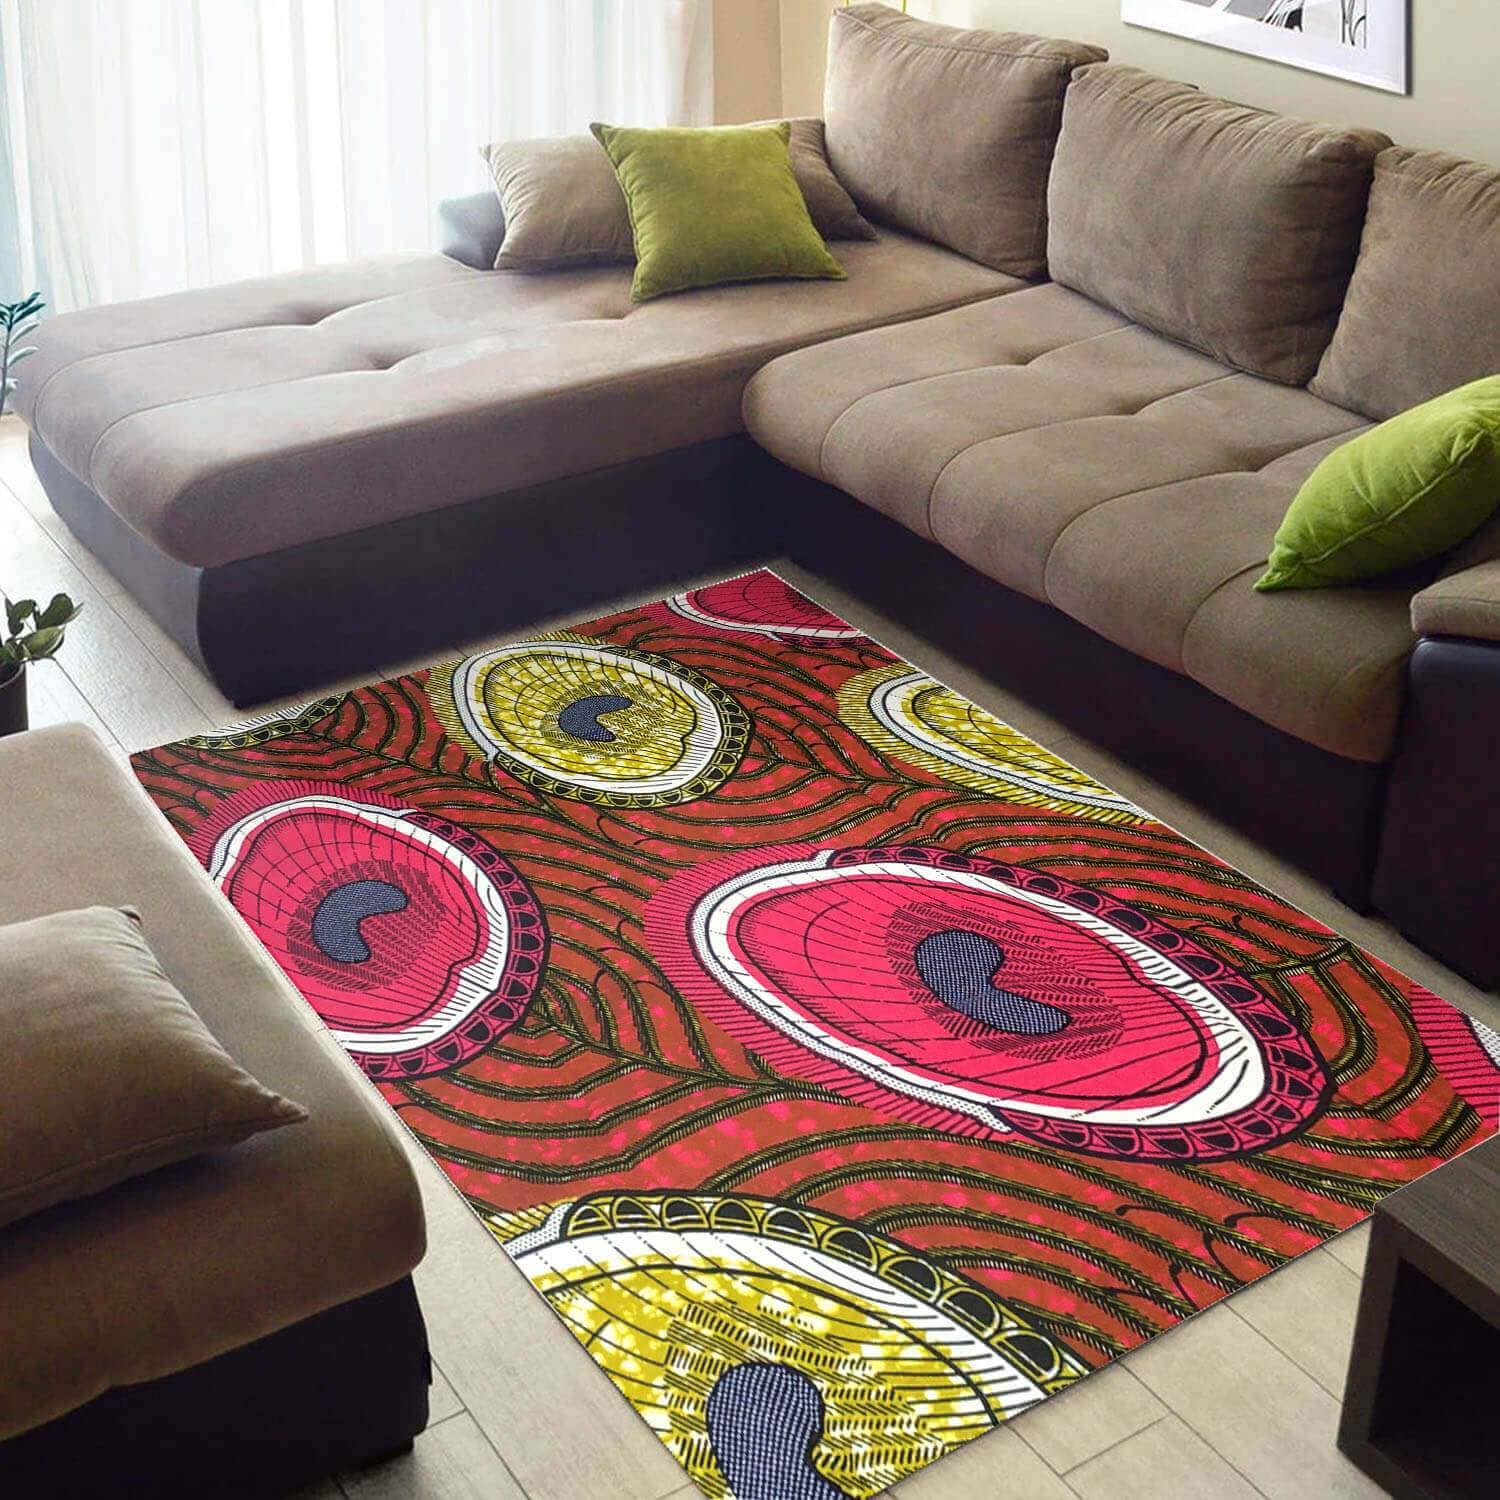 Trendy African Beautiful Themed Afrocentric Art Style Floor Inspired Living Room Rug